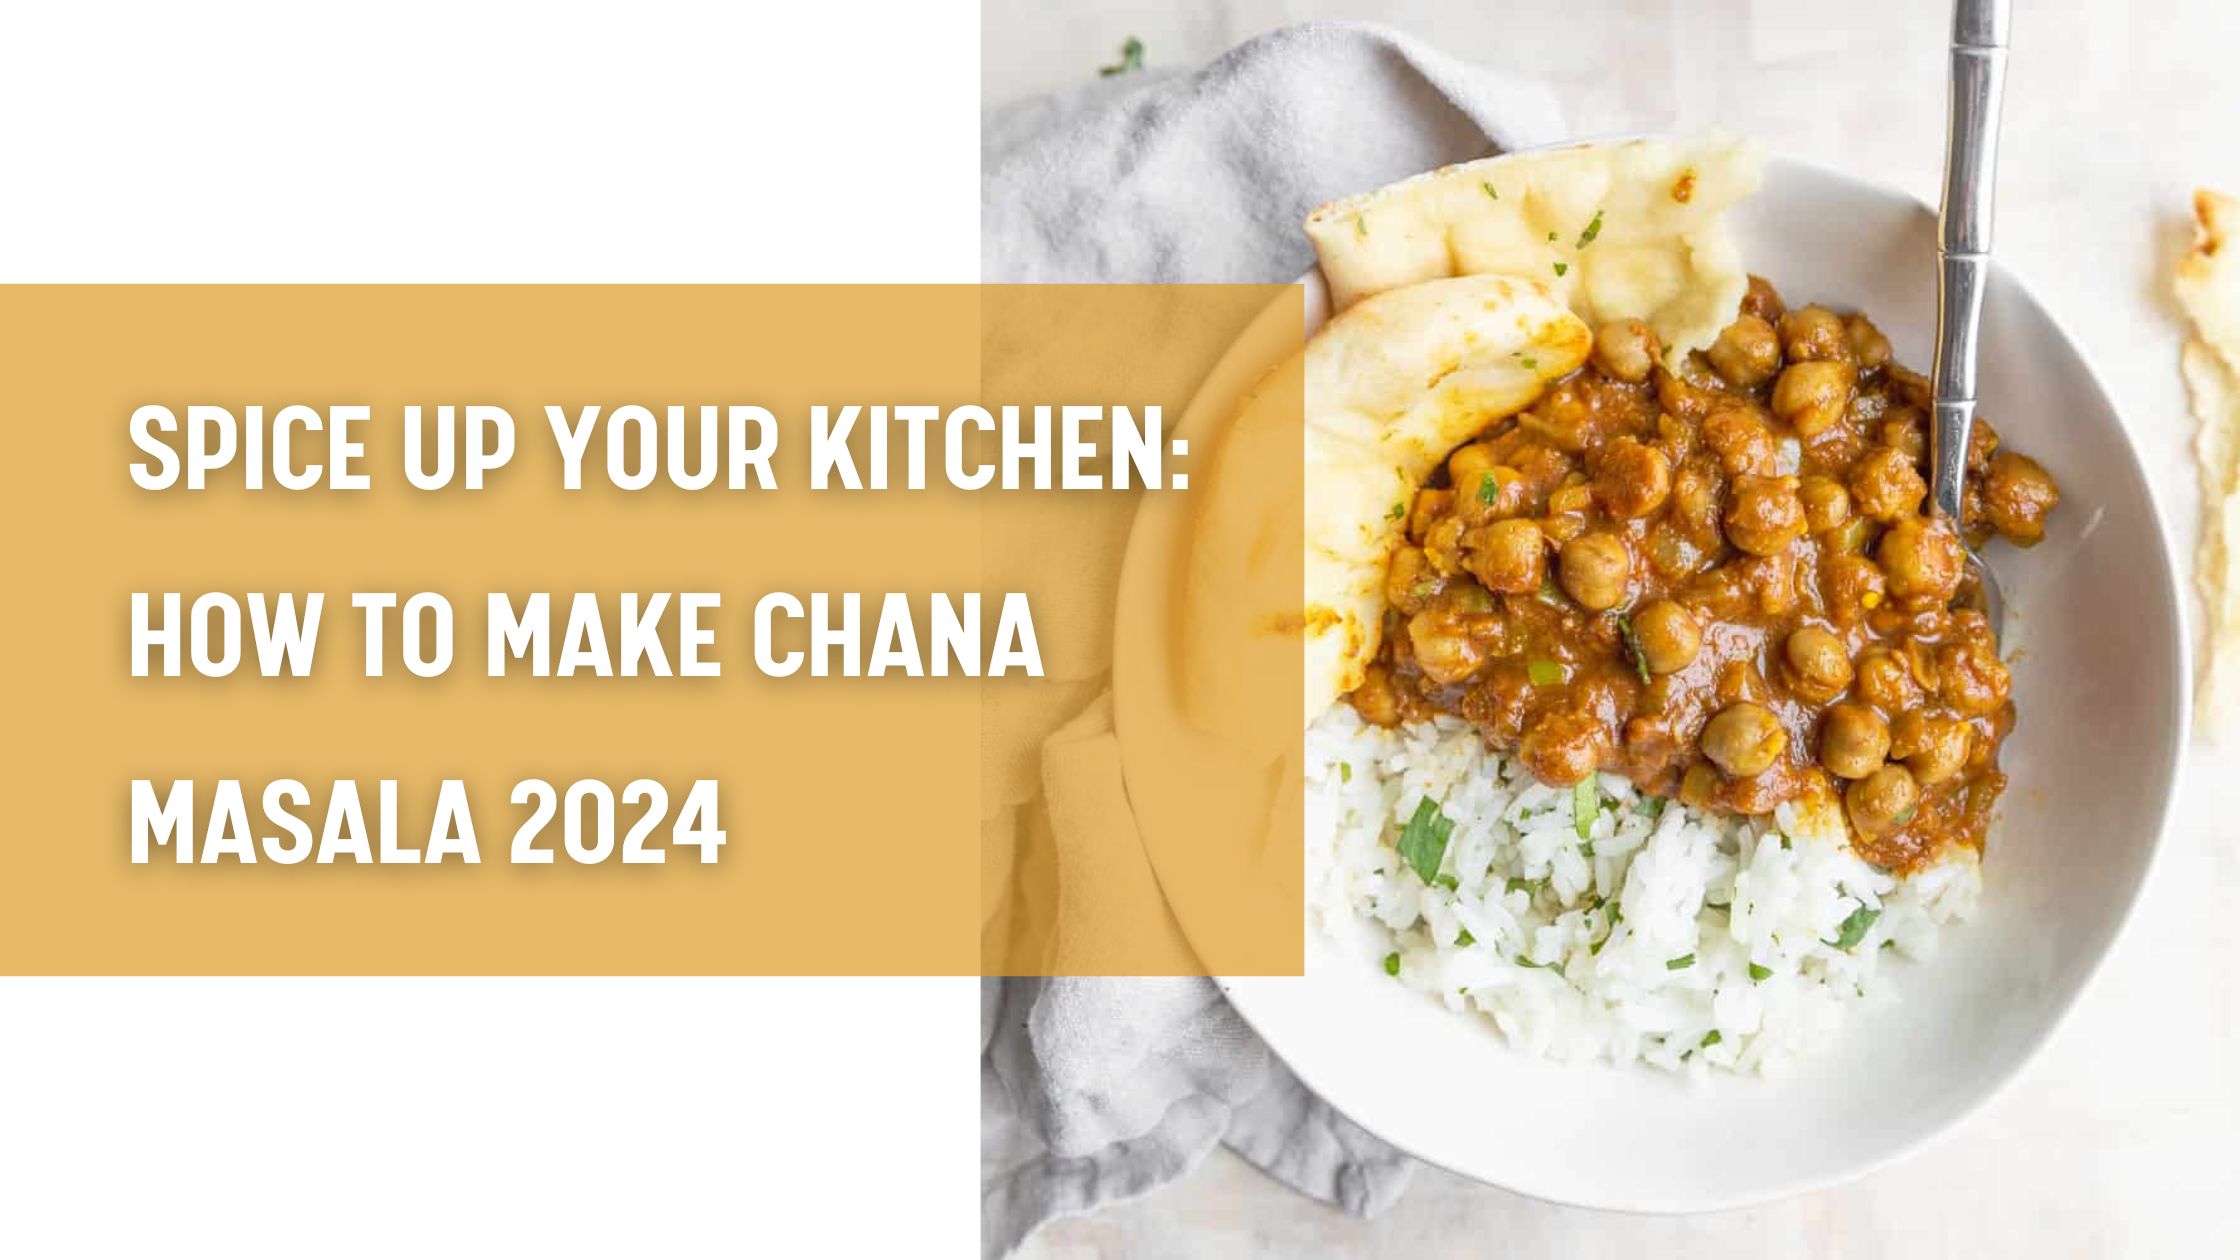 Spice Up Your Kitchen: How To Make Chana Masala 2024